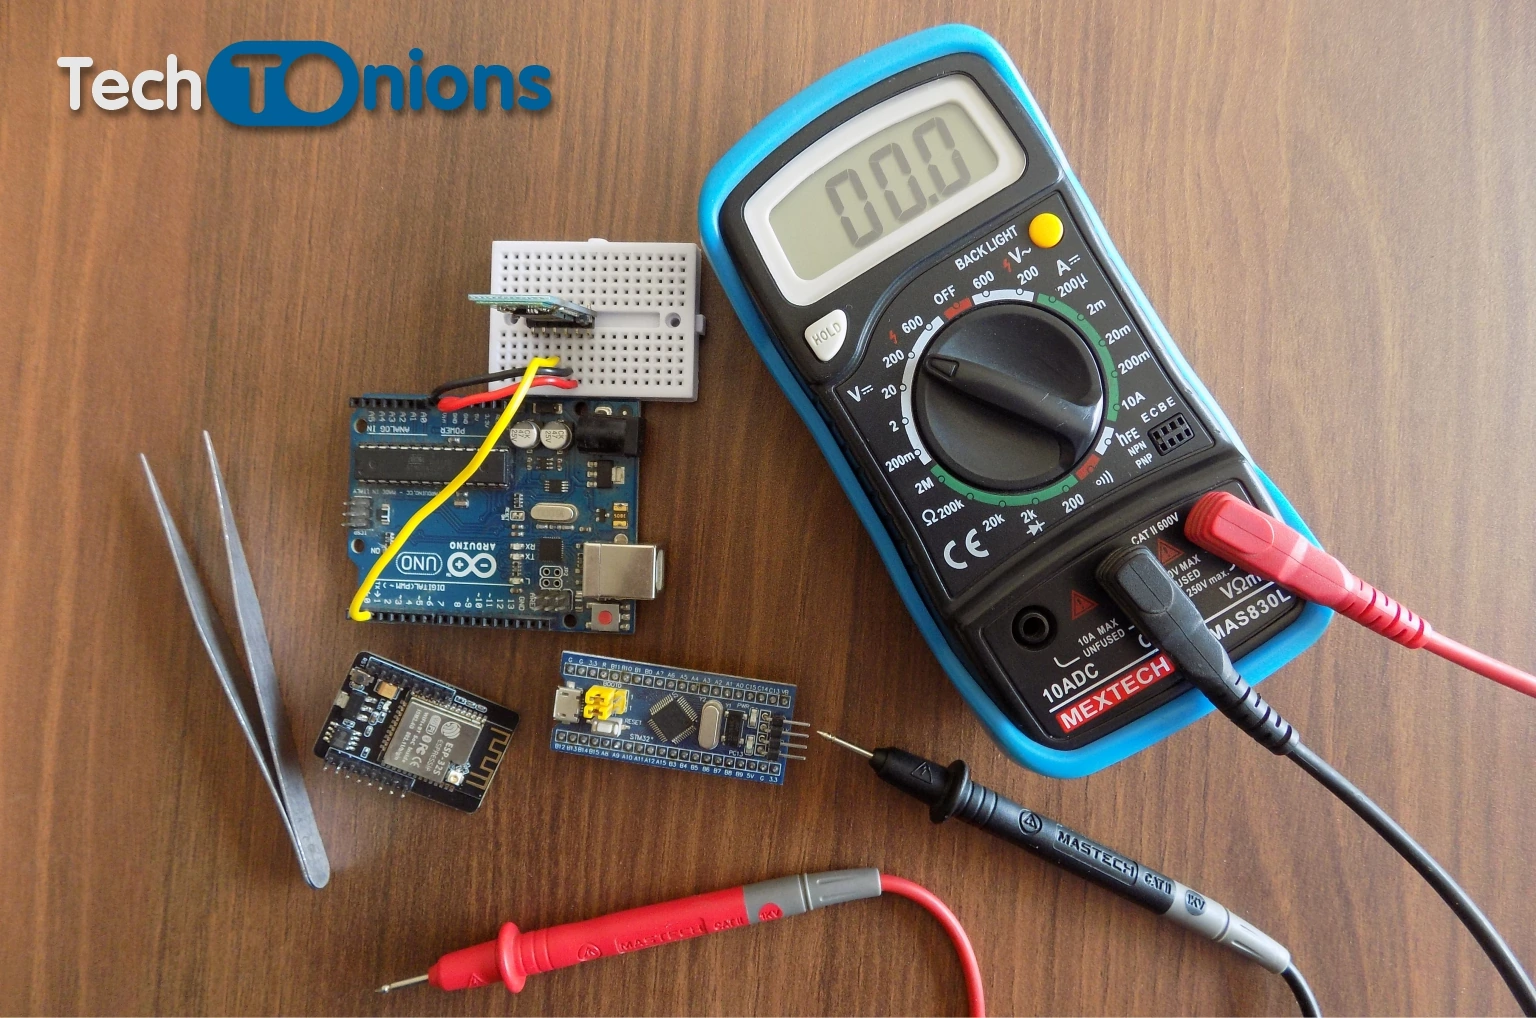 https://www.techtonions.com/wp-content/uploads/2021/05/how-to-use-a-multimeter.webp